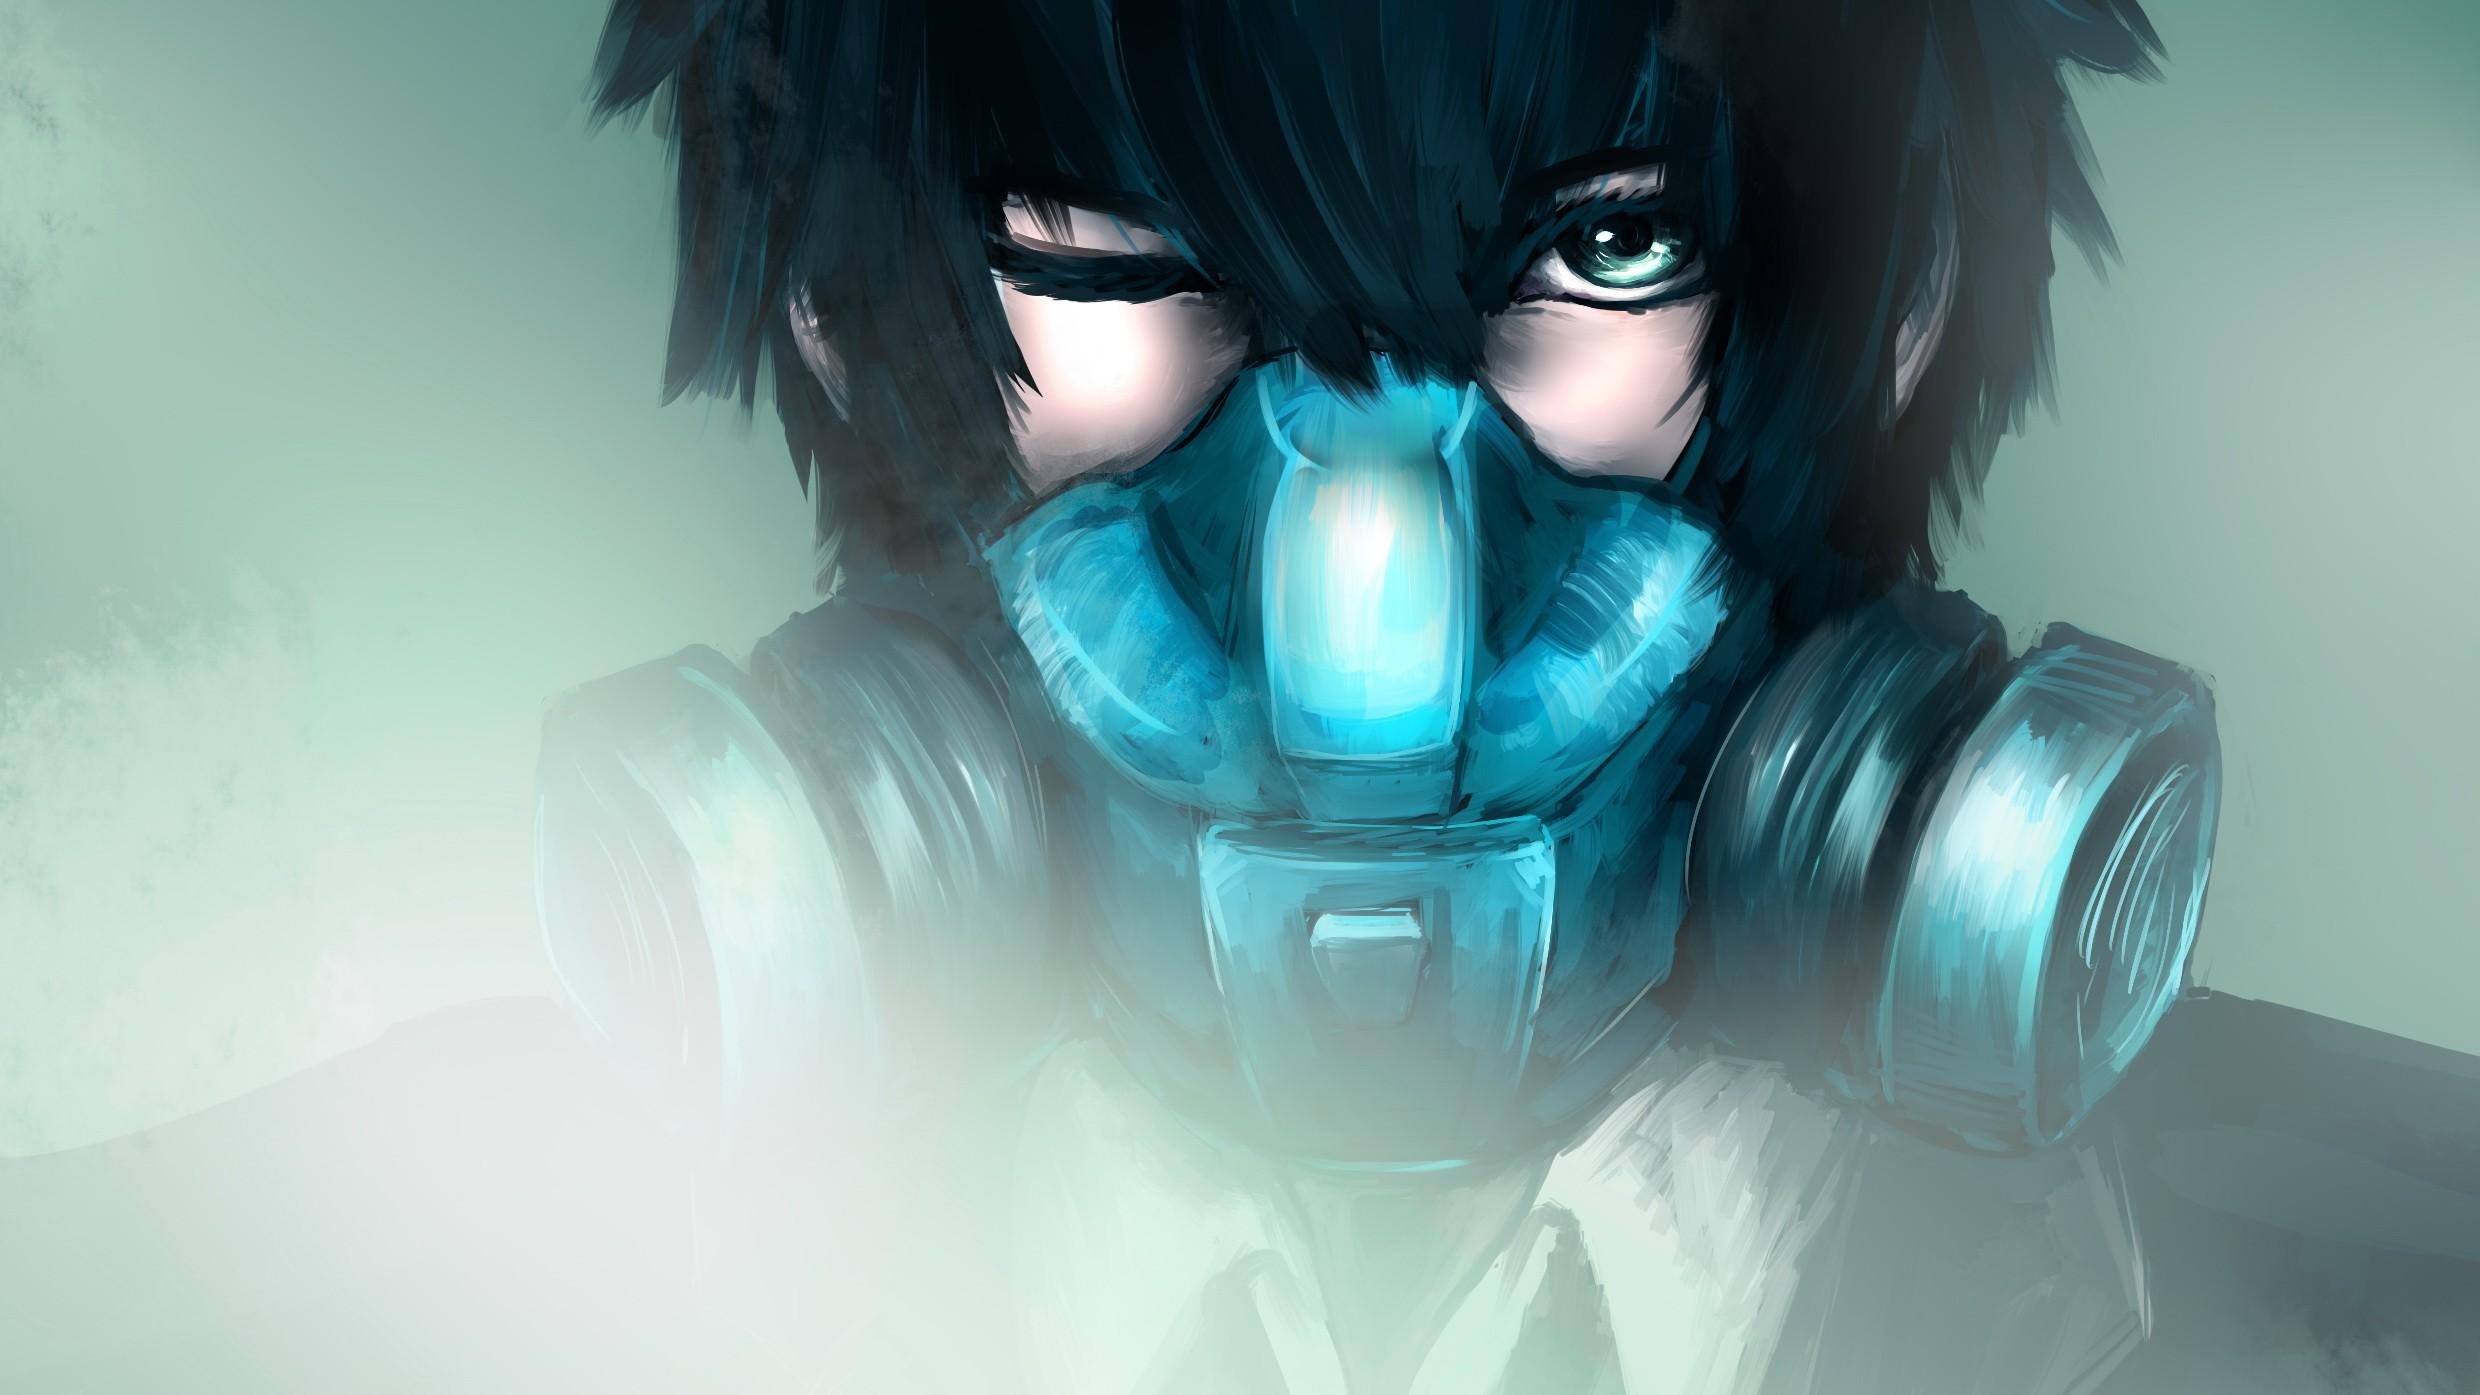 Close Up, Suit, Tie, Gas Masks, Green Eyes, Short Hair